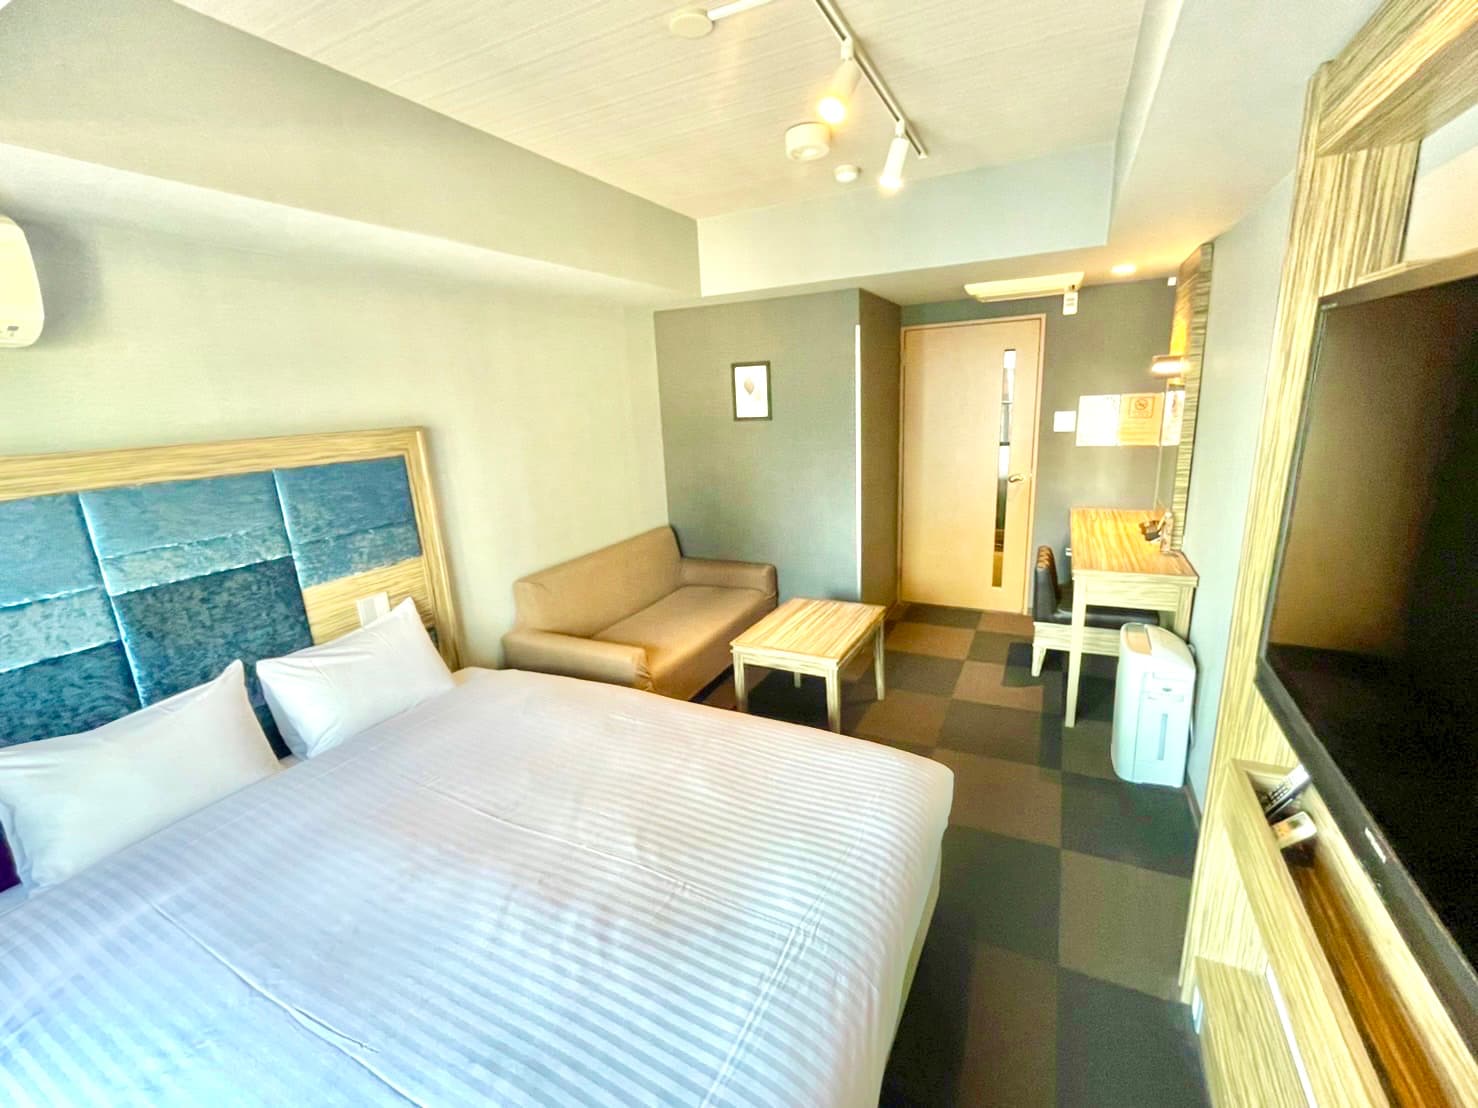 [Guest room] Deluxe double room / size 23 square meters / separate bath and toilet / capacity 2 people